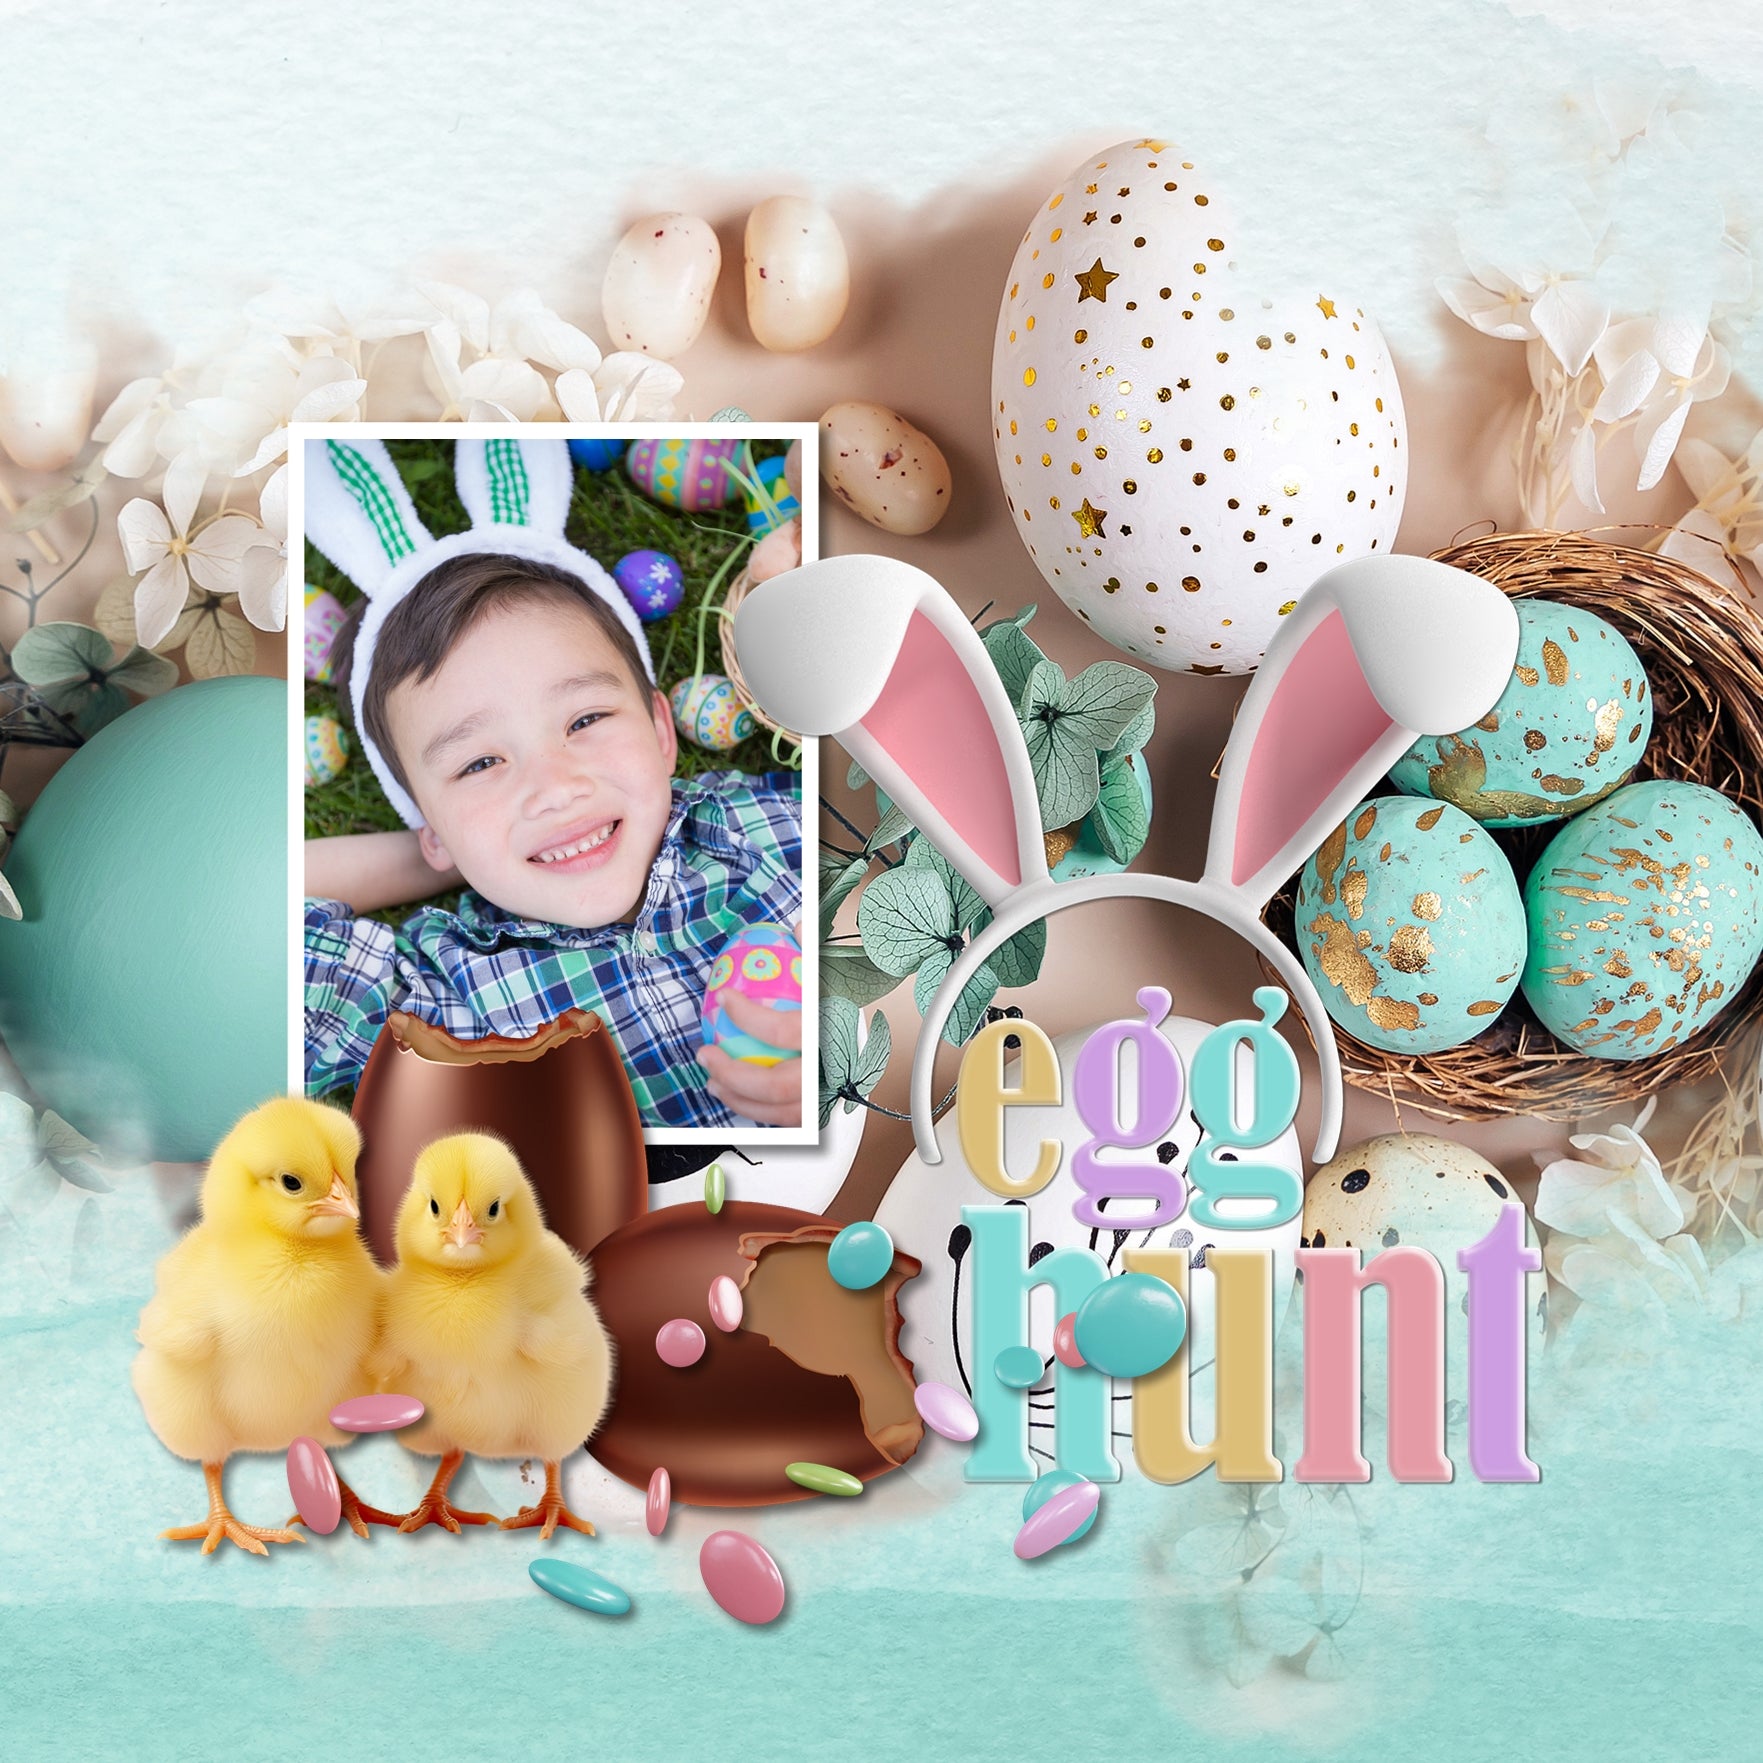 Create your own digital scrapbooking titles and word art with these stylish pastel alphabet letters, numbers, and punctuation by Lucky Girl Creative digital art that are perfect for any occasion and theme. Especially great for any Easter, spring, or baby pages. The Easter in Spring Alpha Bundle consists of a full set of digital art uppercase letters A-Z, lowercase letters a-z, numbers 0-9, and most punctuation marks in pastel yellow, purple, pink, and blue.